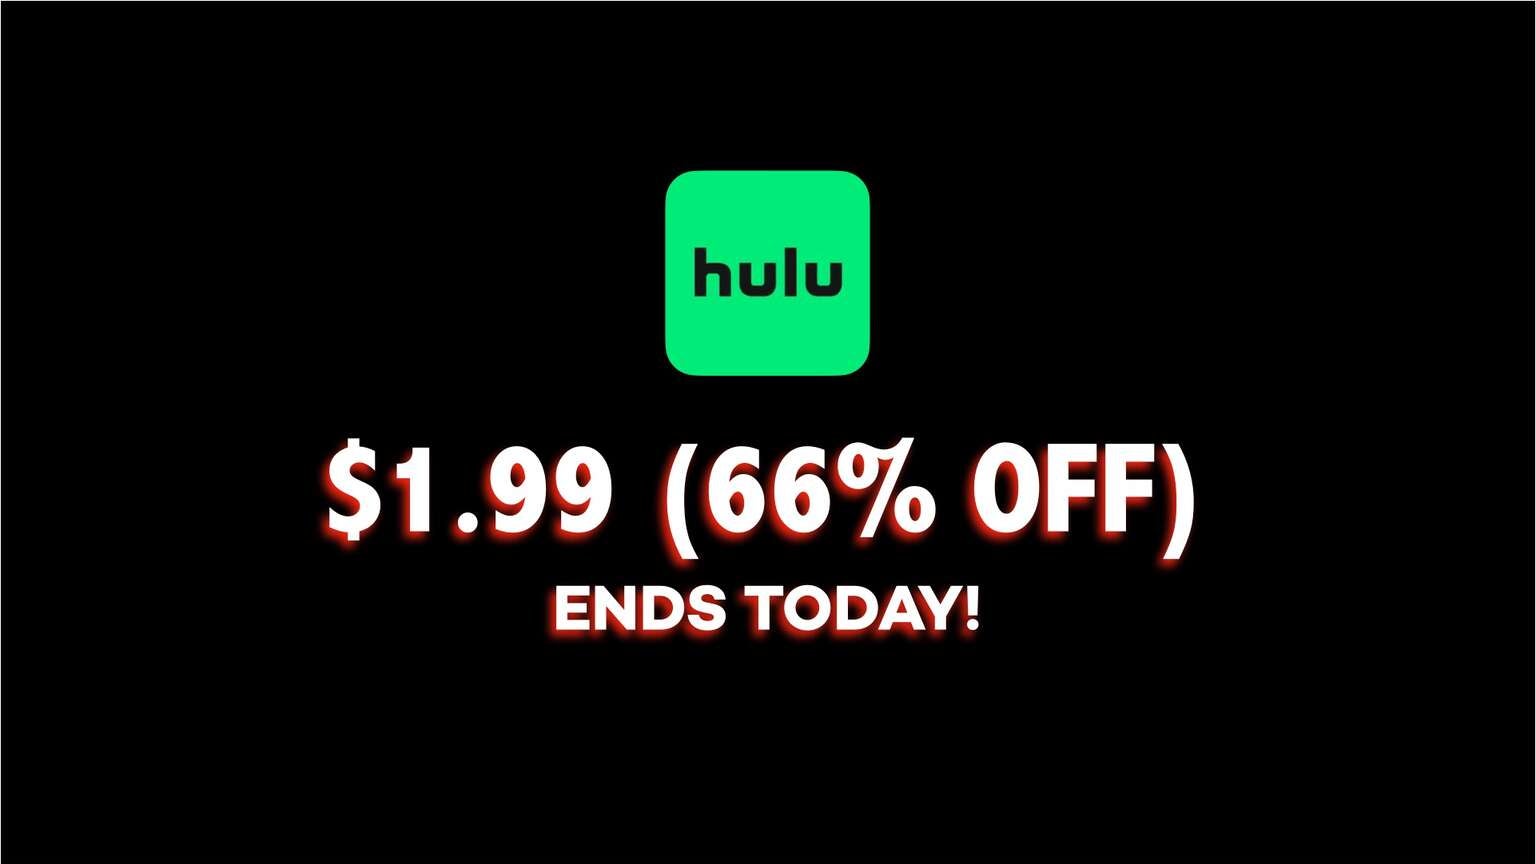 Hulu Cyber Monday 2020 Last Day to Get Hulu For Just 1.99 a Month (66